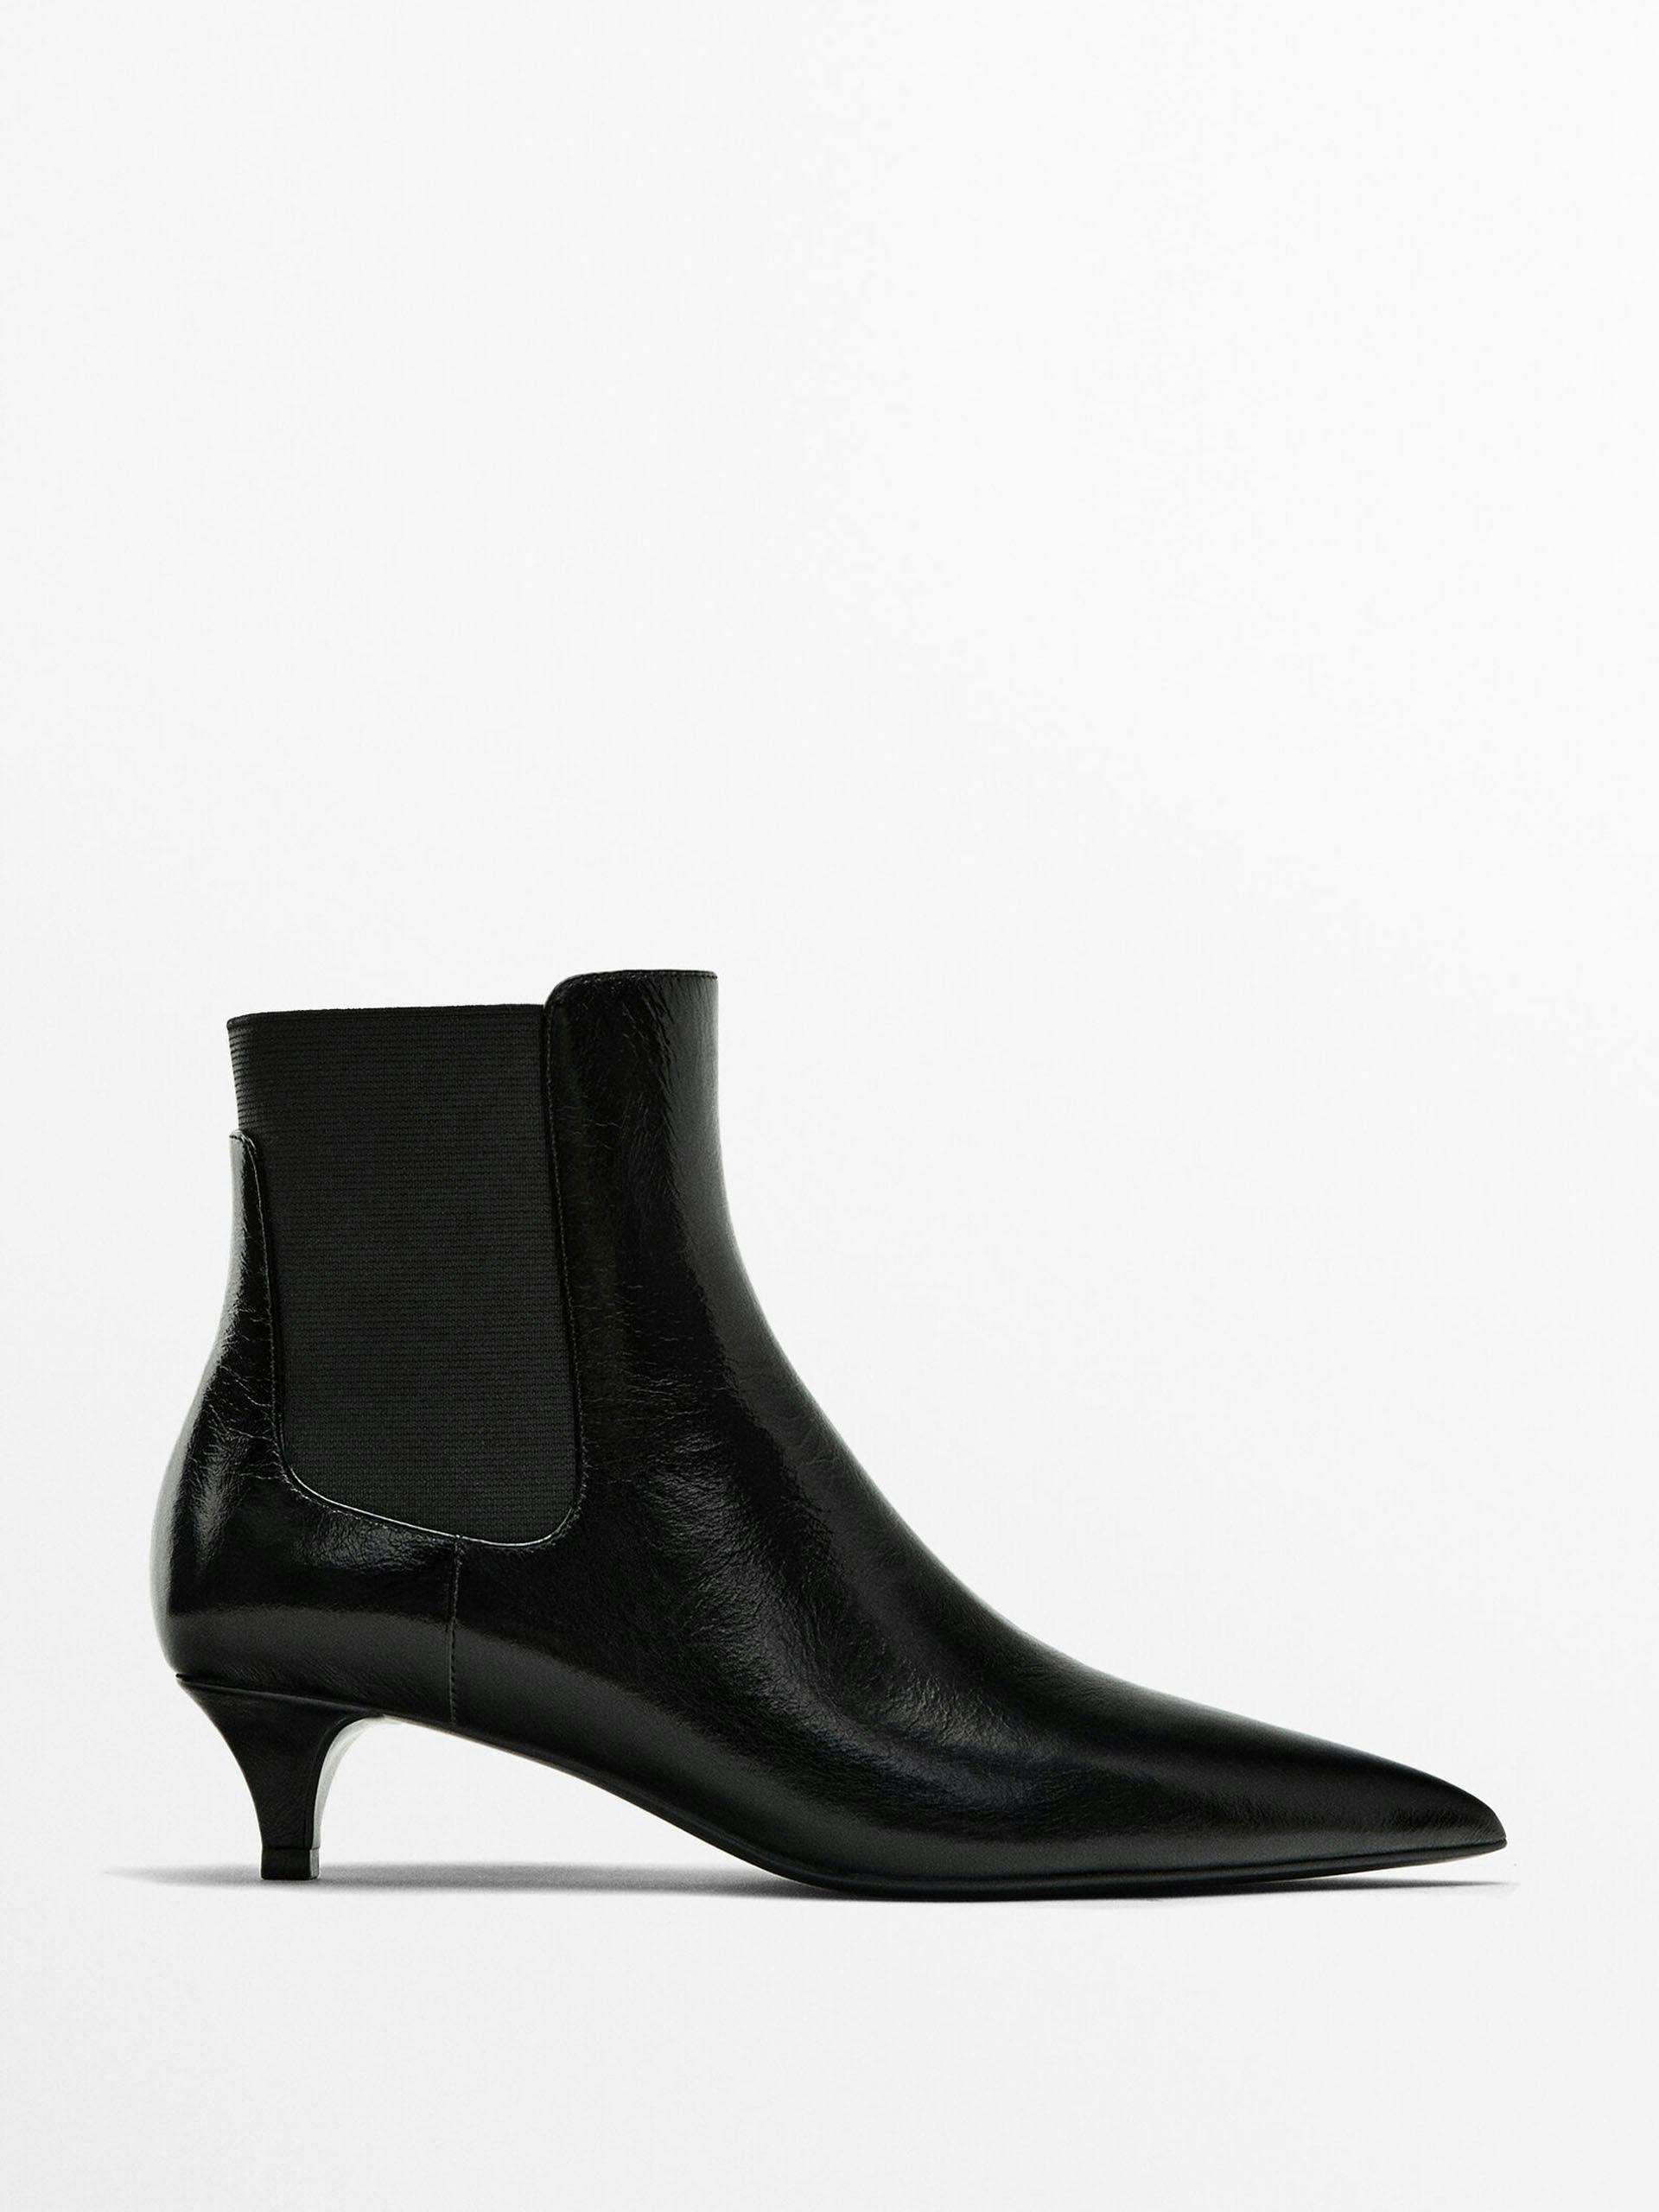 Black low-heel ankle boots